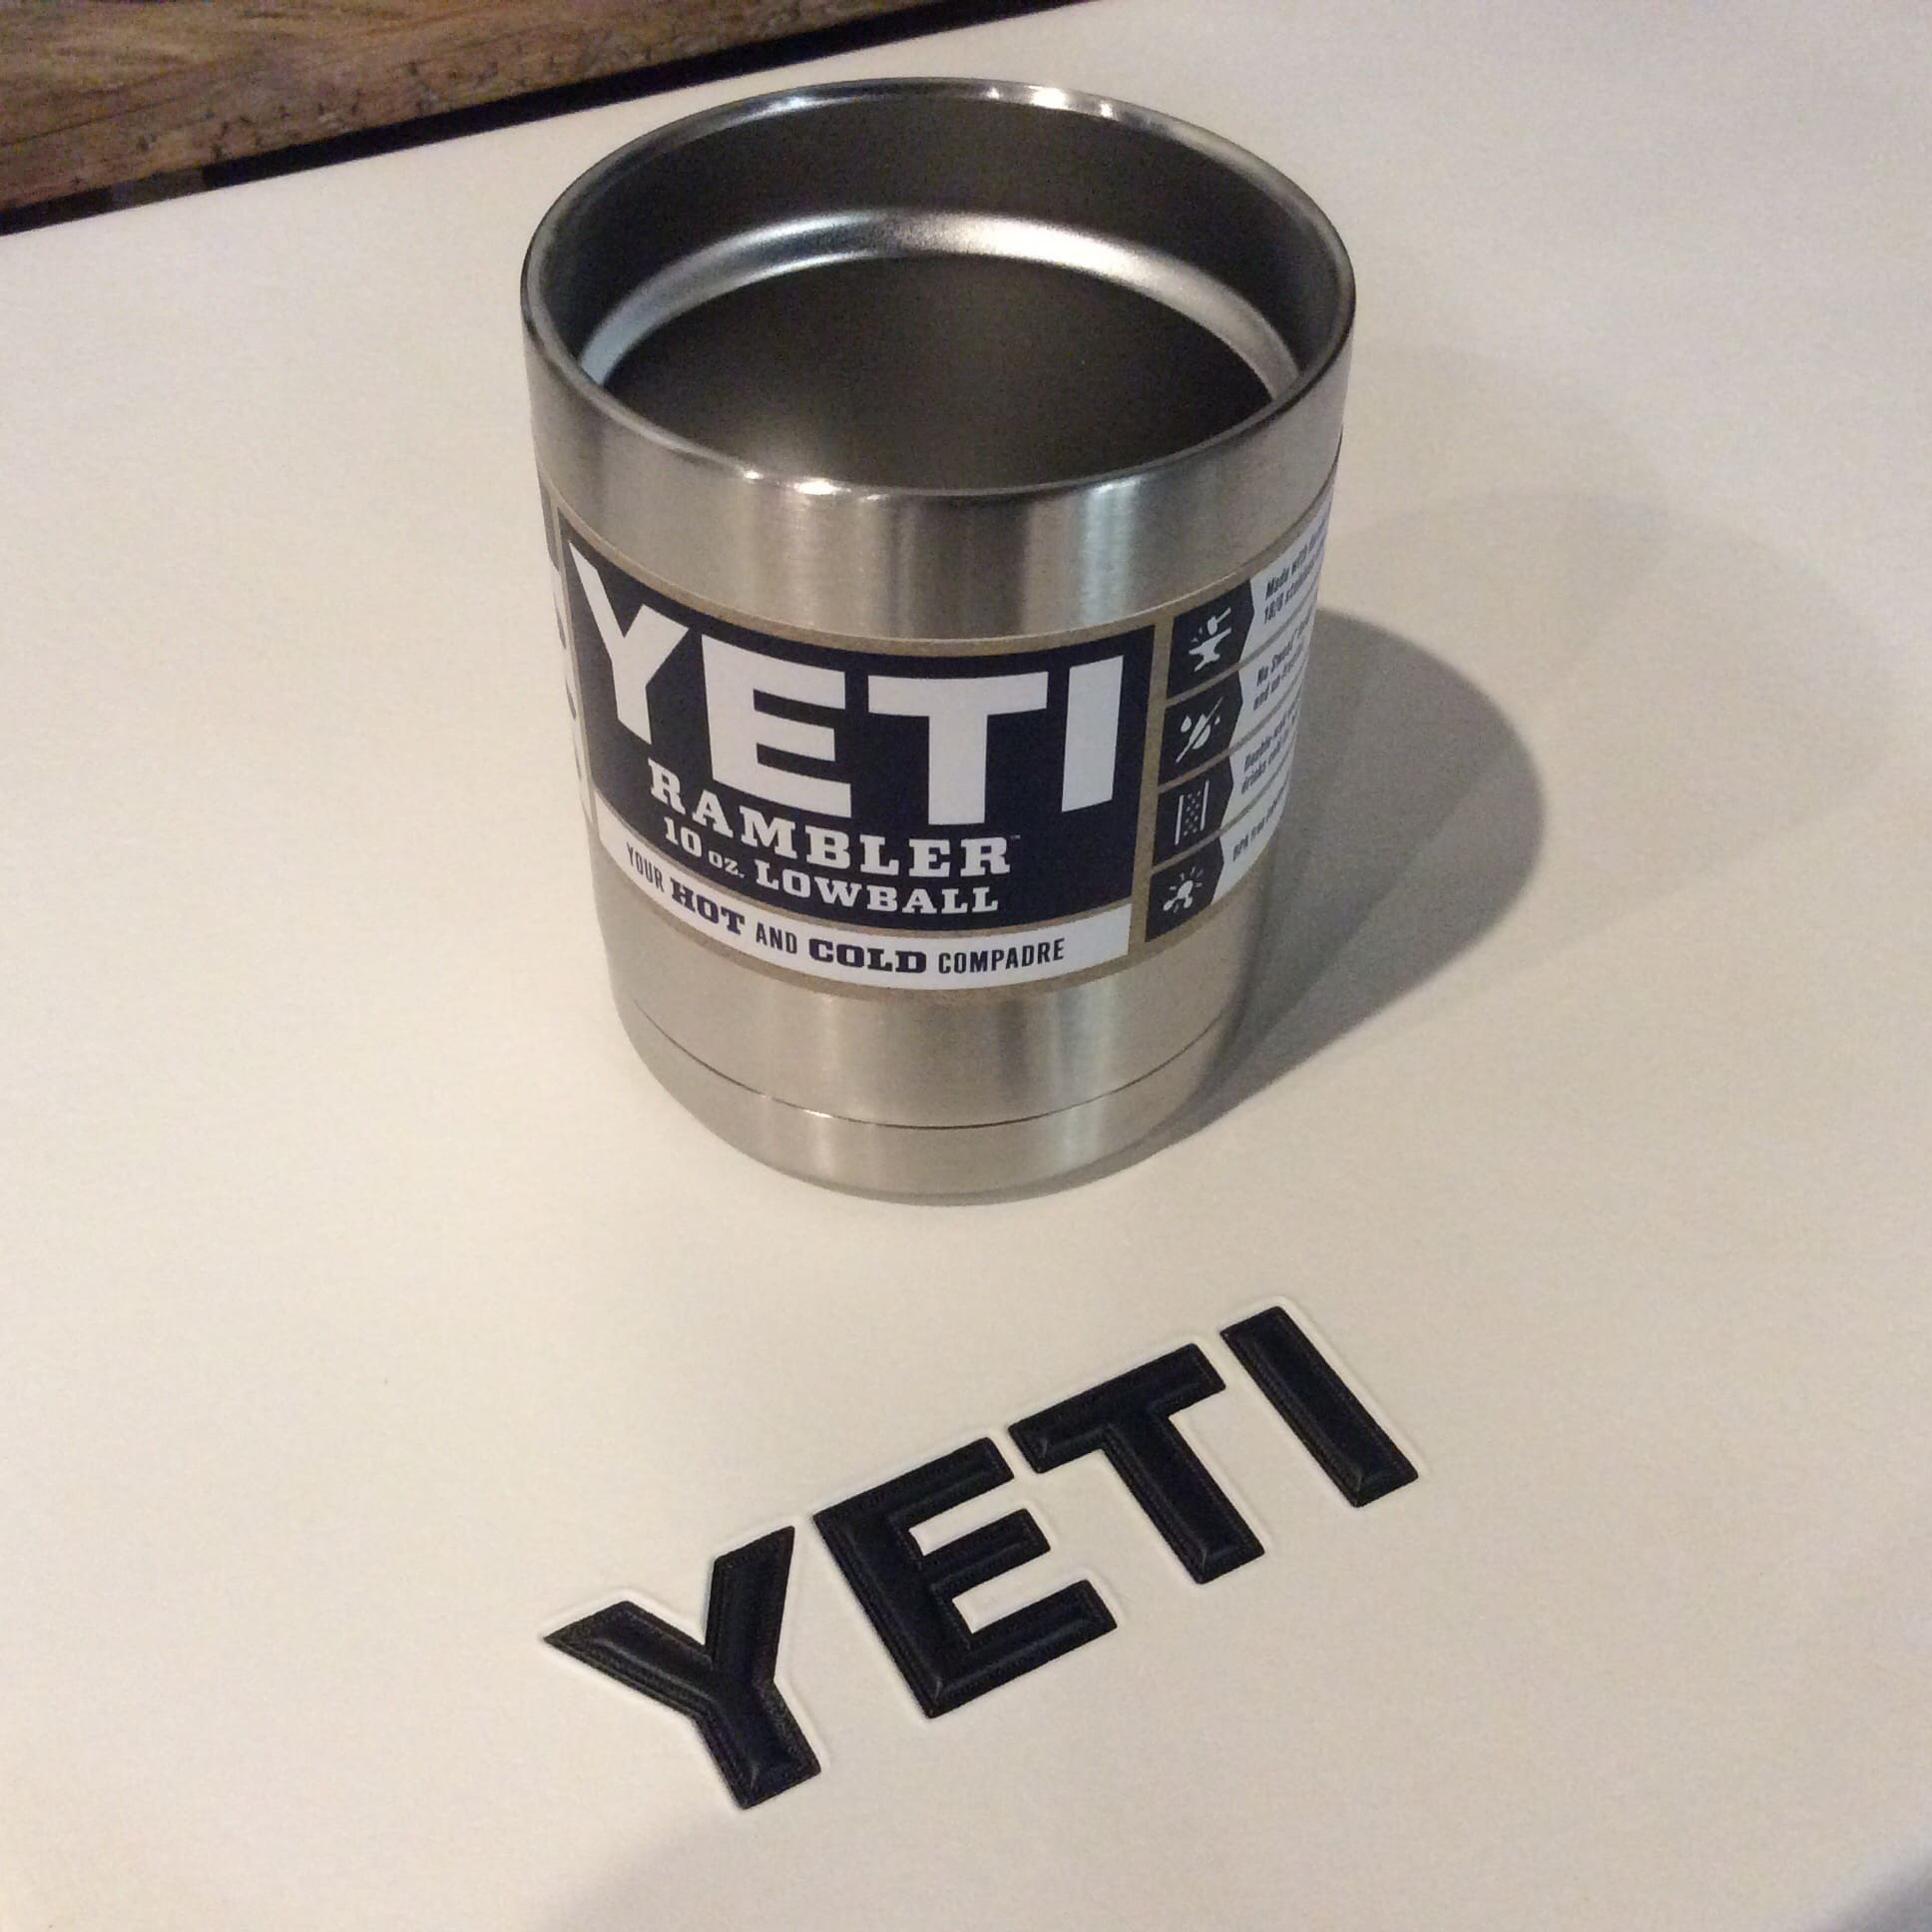 OR - Yeti Coolers - Soldier Systems Daily